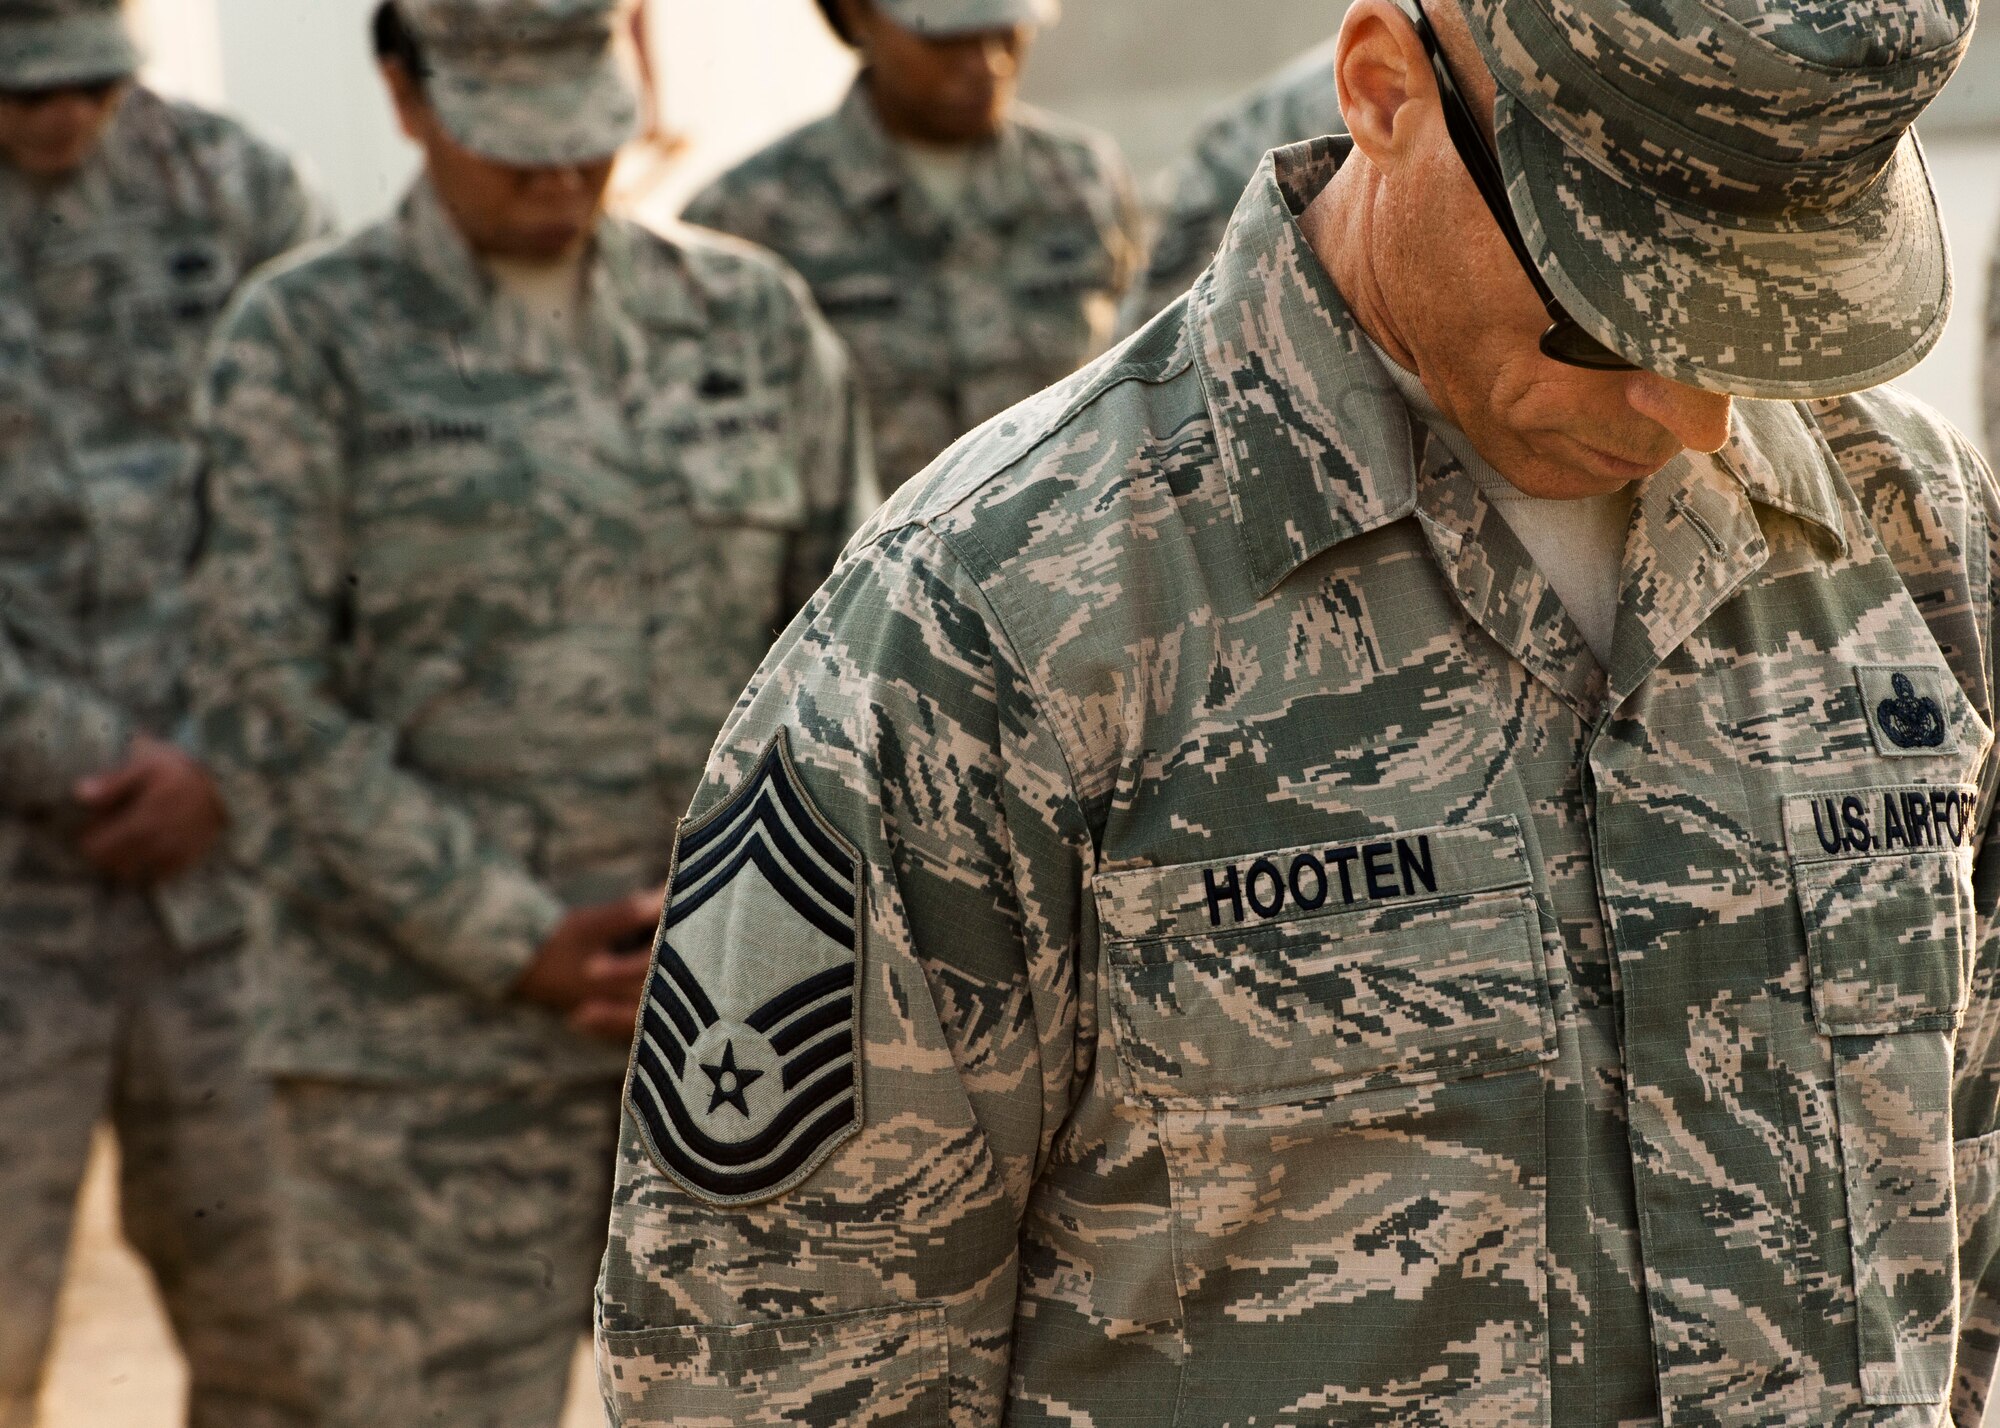 U.S. Air Force Chief Master Sgt. Darrin Hooten, 332nd Expeditionary Mission Support Group superintendent, bows his head in prayer during a retreat ceremony Dec. 30, 2016, in Southwest Asia. The retreat ceremony serves as a sign of the end of the duty day and pays respect to the U.S. national flag. (U.S. Air Force photo by Staff Sgt. Eboni Reams)